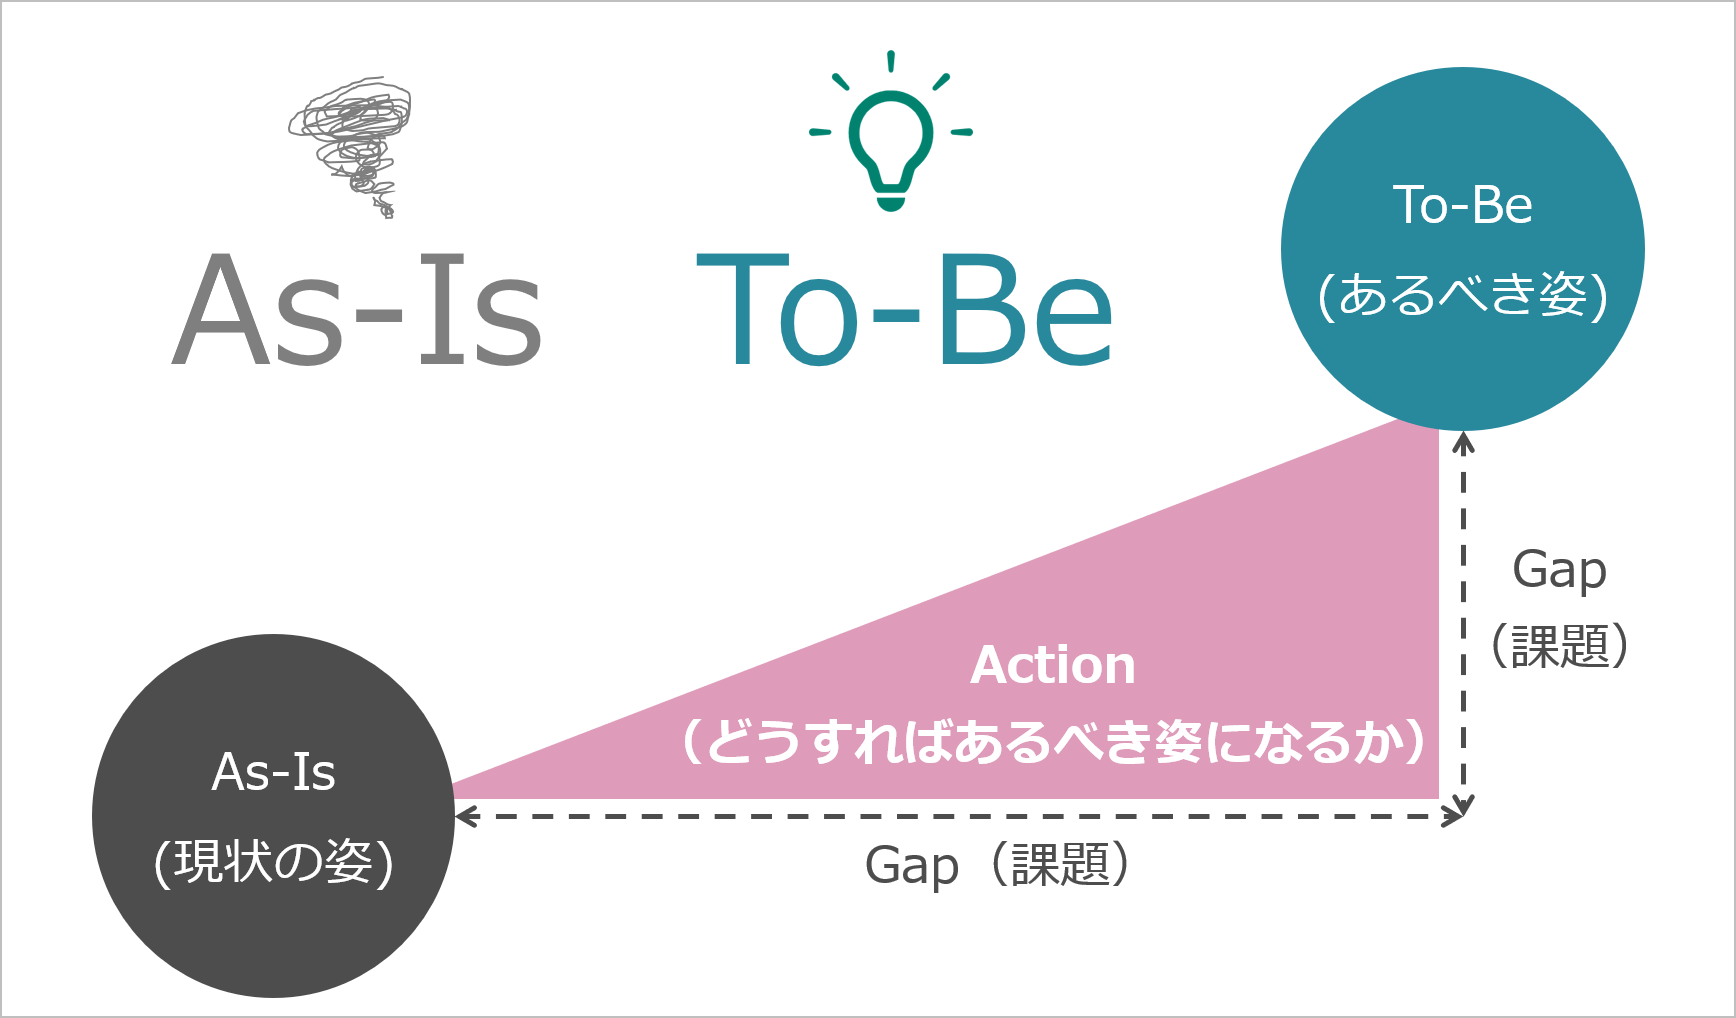 As-Is/To-Be分析の概念図